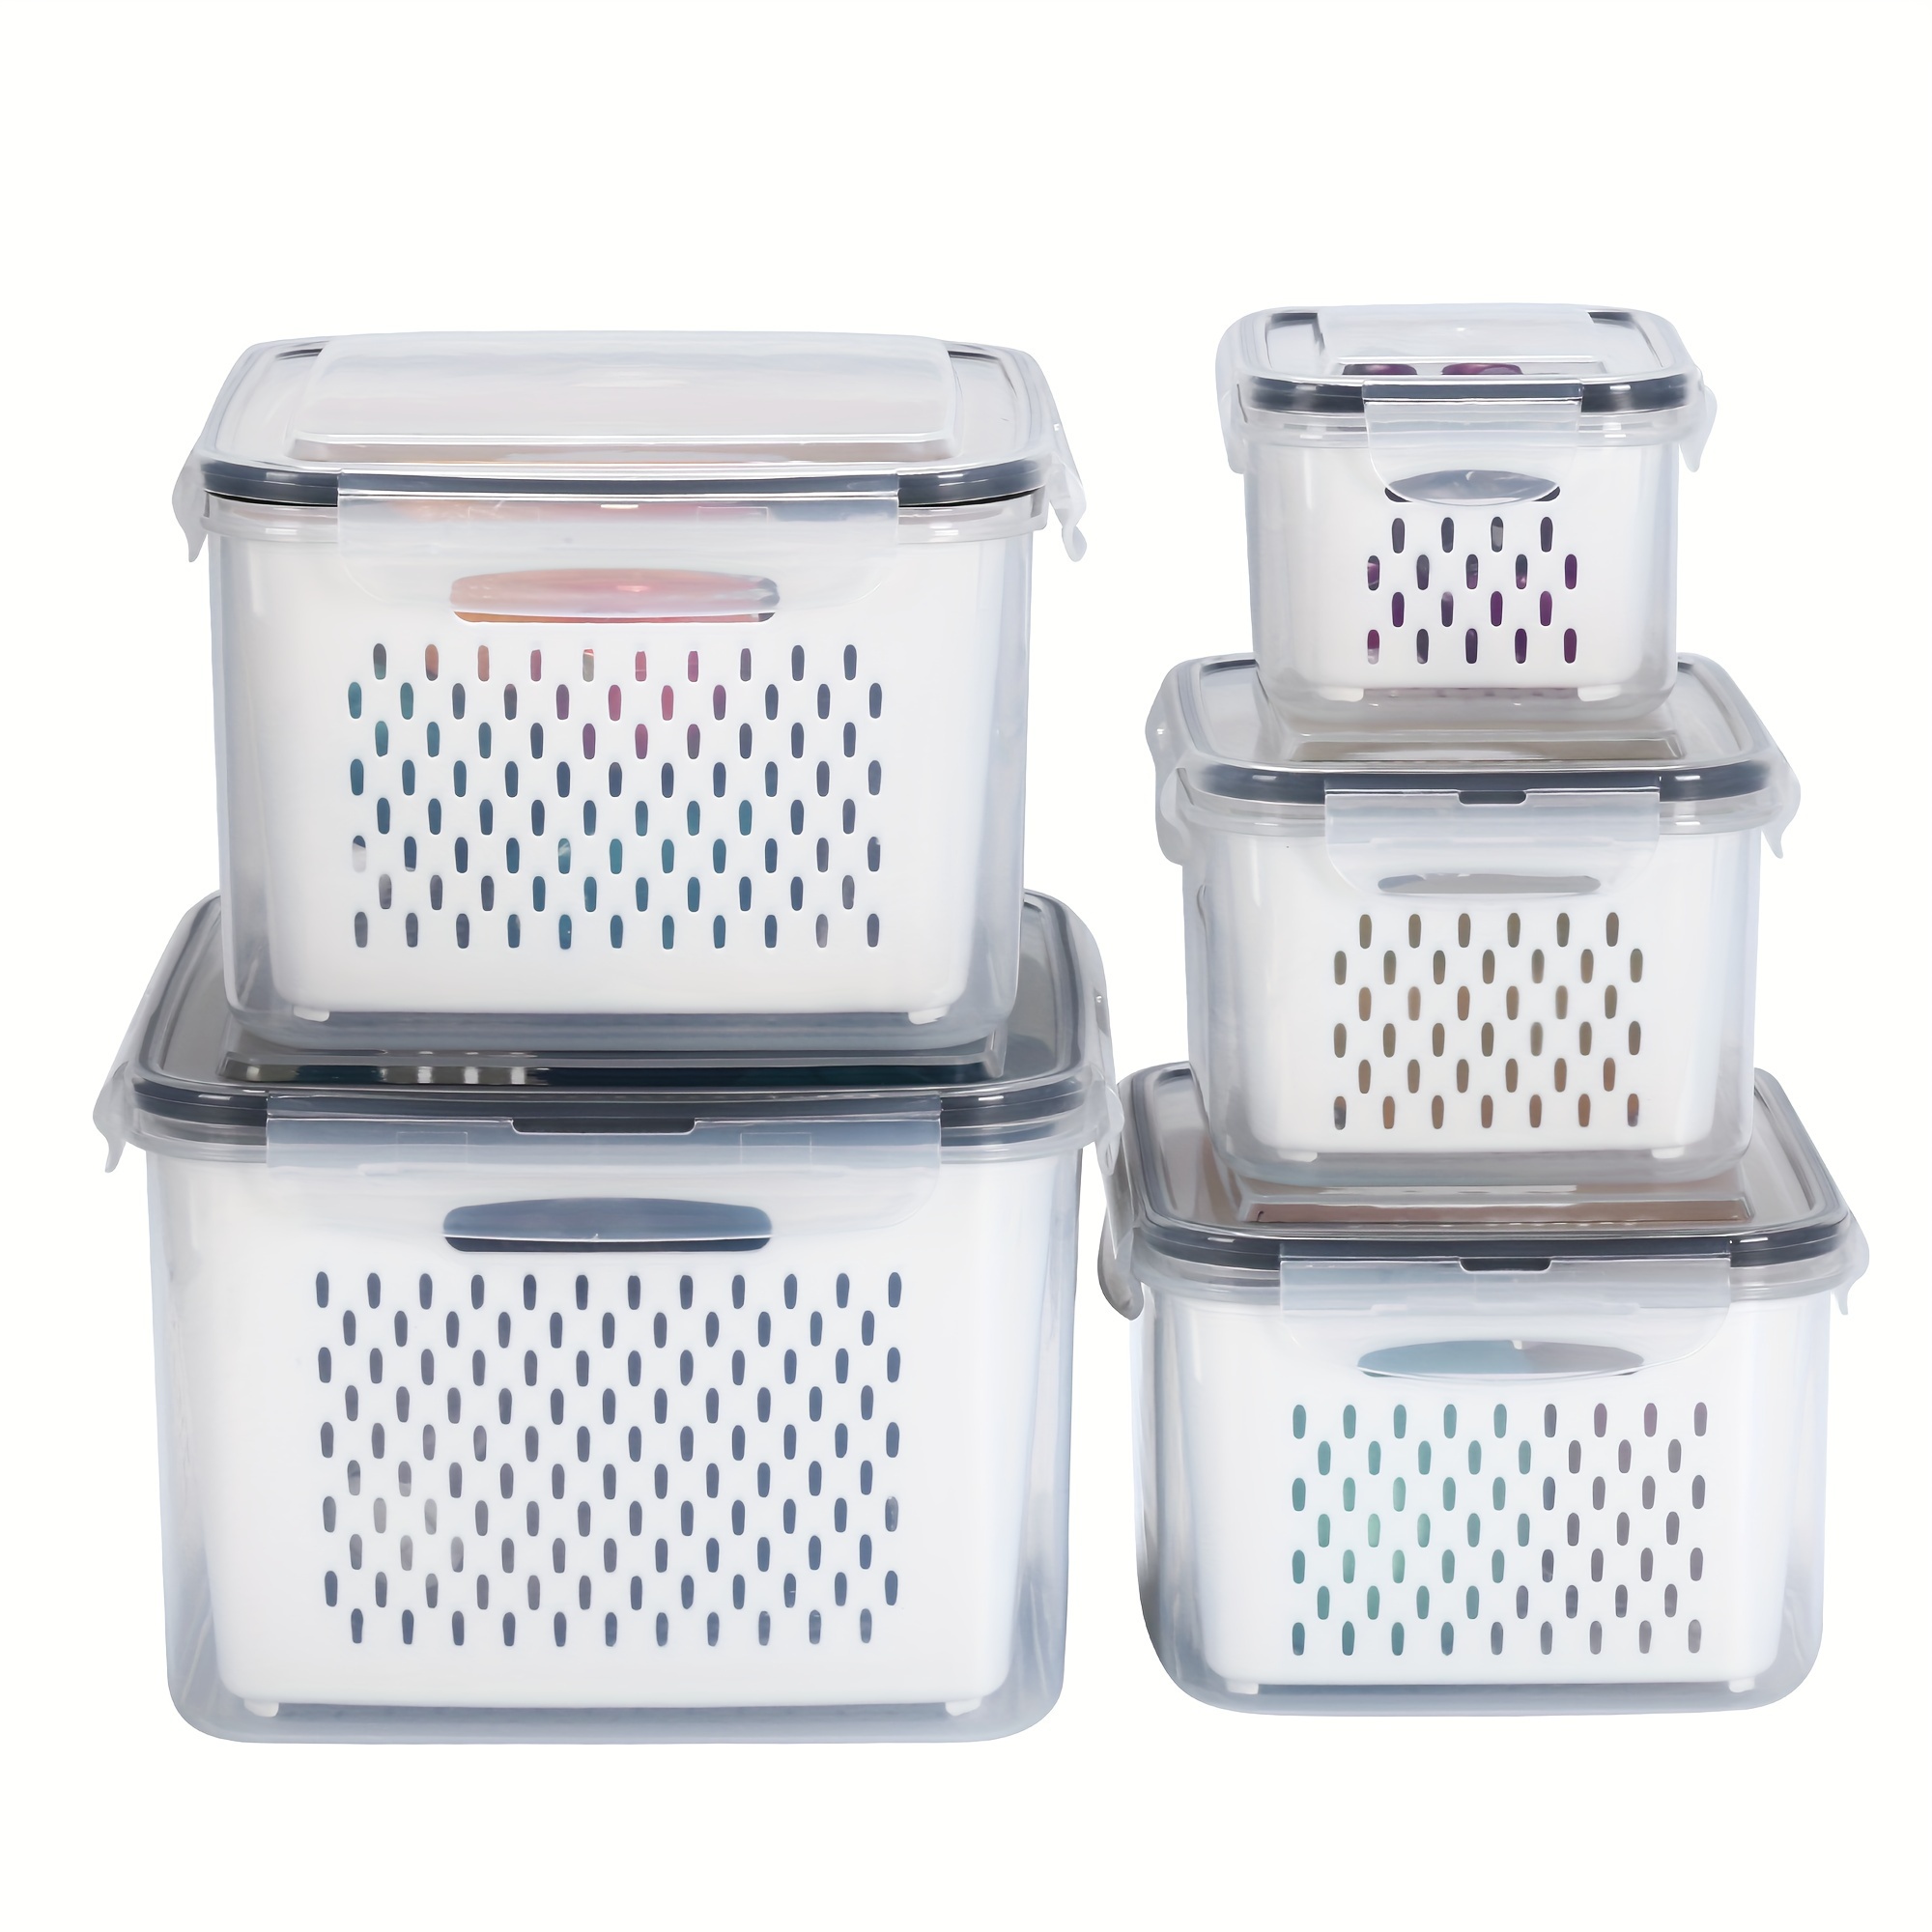 Portable Plastic Storage Container, Product Storage